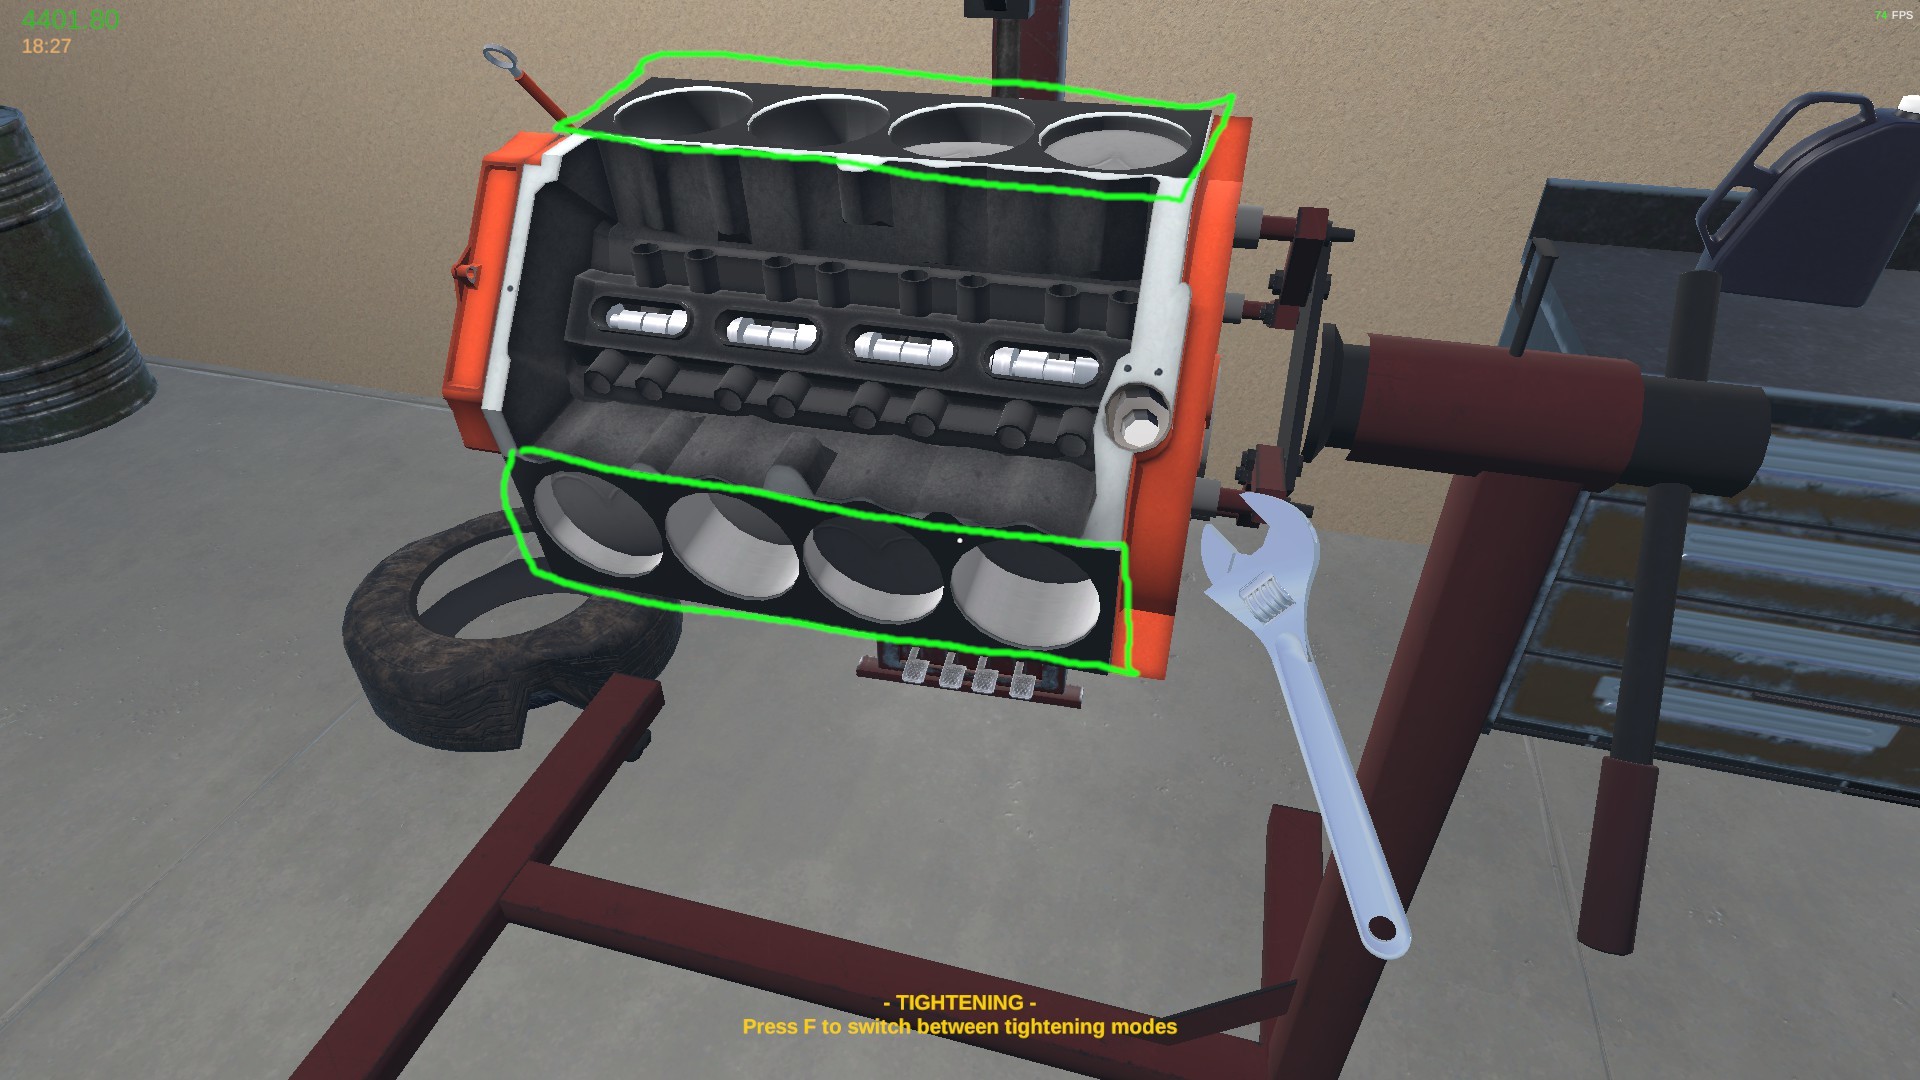 My Garage How to build a V8 engine guide - 2. Engine Block - 13AC0B5